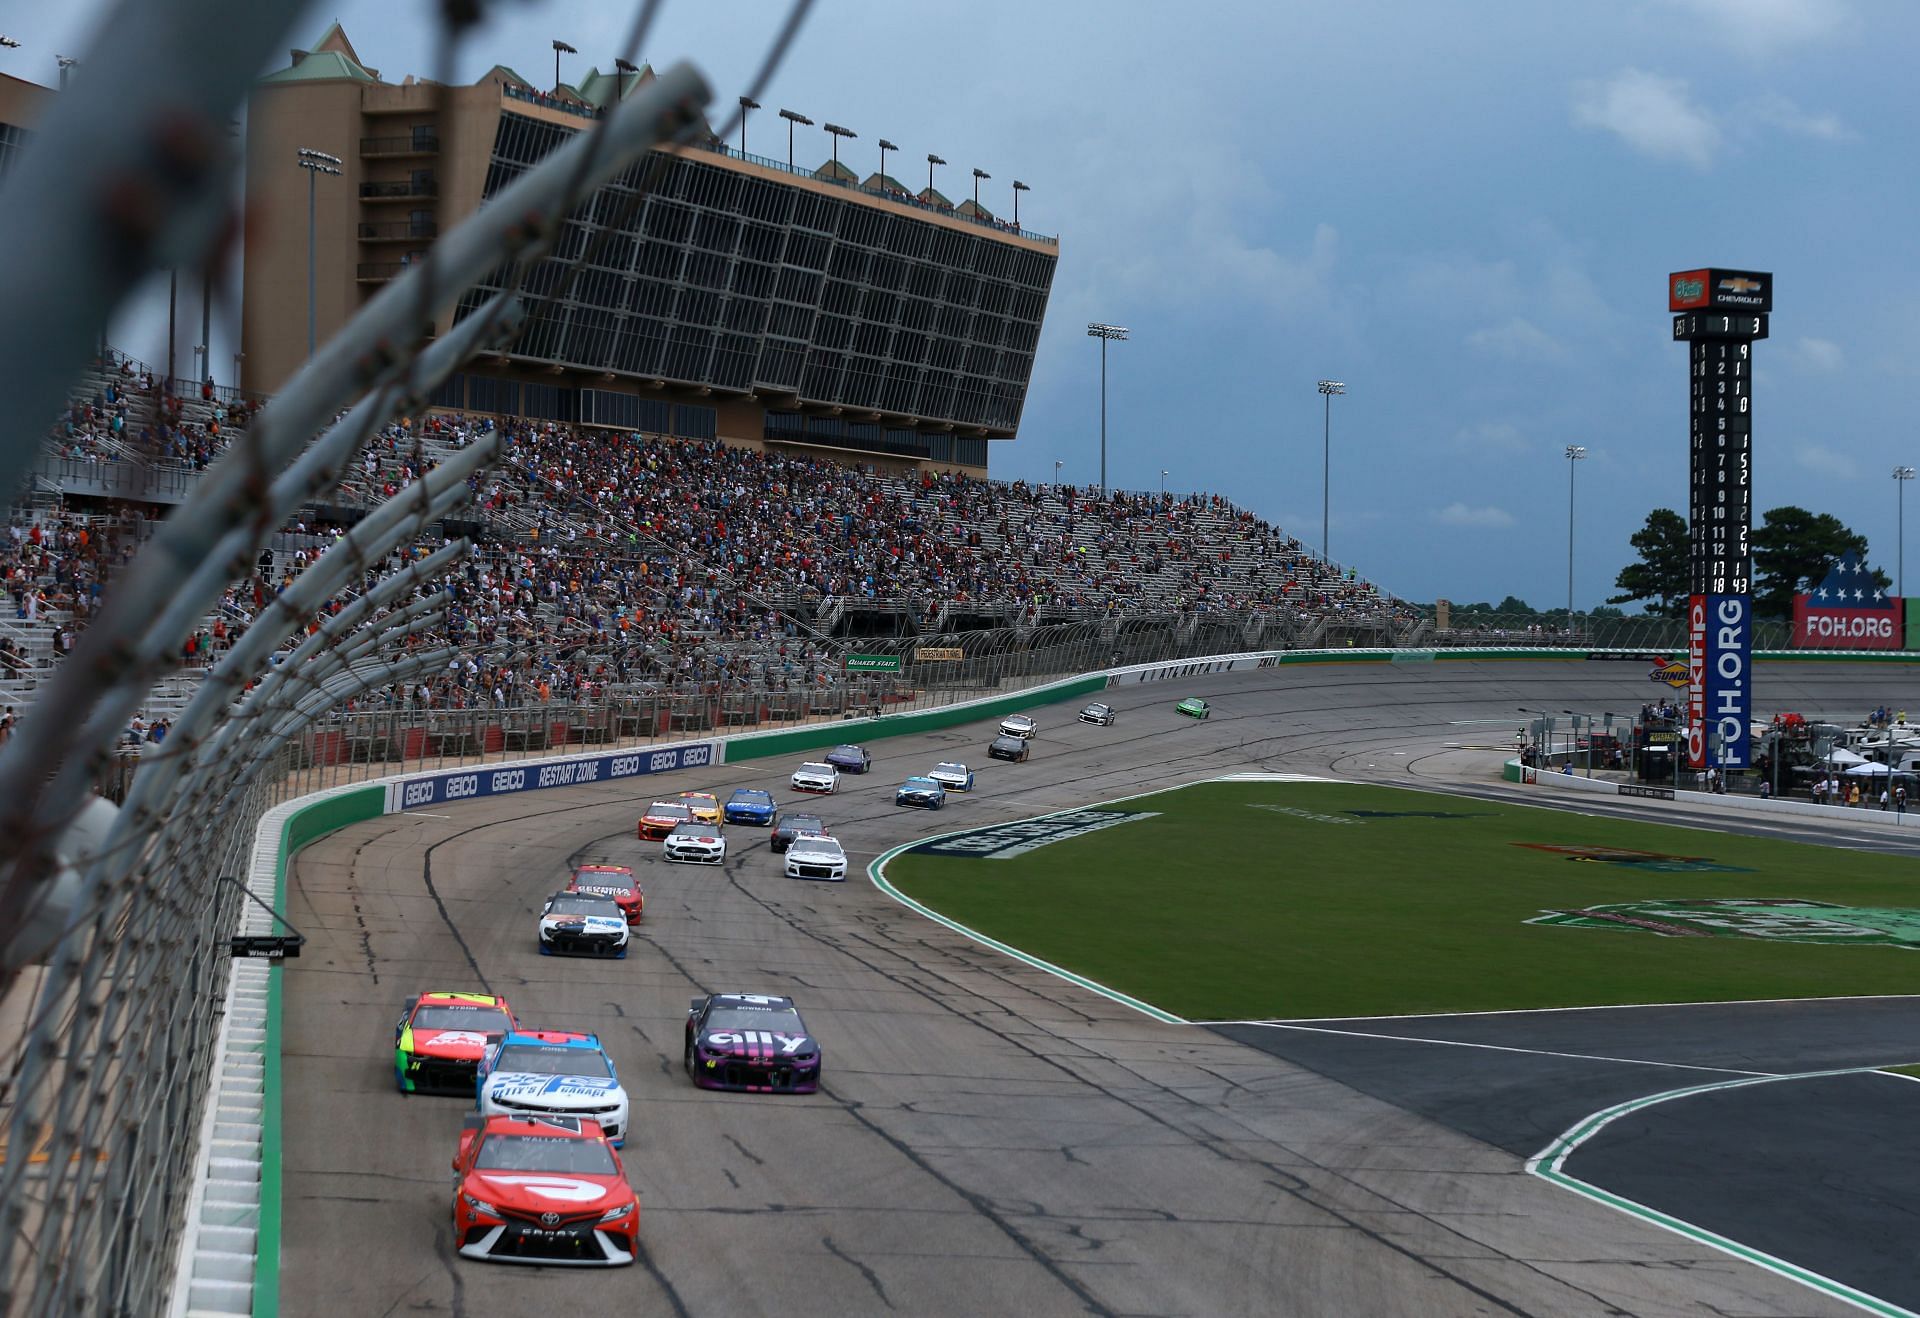 A general view of cars on track during the NASCAR Cup Series Quaker State 400 presented by Walmart at Atlanta Motor Speedway (Photo by Sean Gardner/Getty Images)